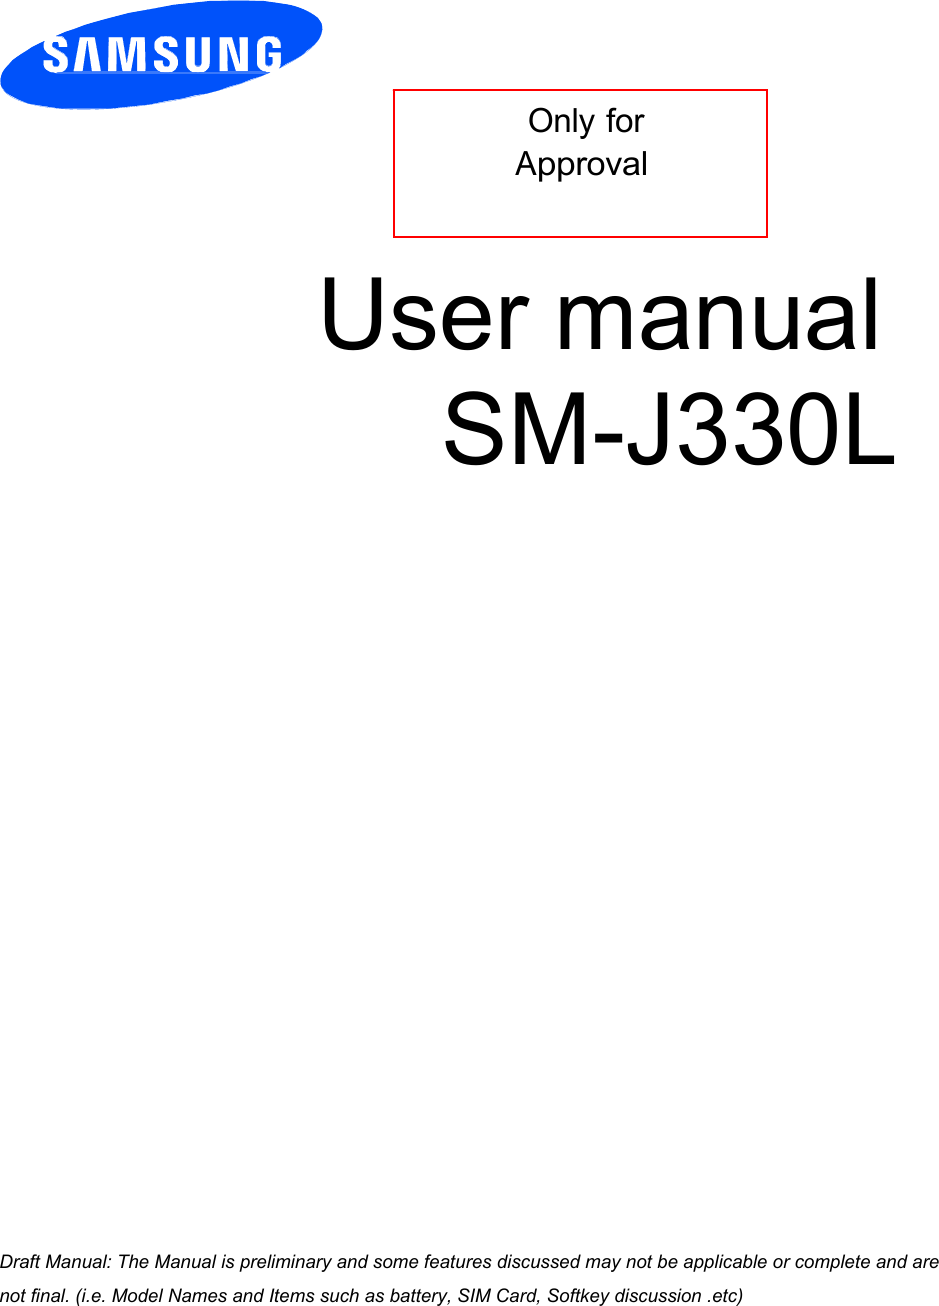  Only for Approval User manual         SM-J330L a ana  ana  na and  a dd a n  aa   and a n na  d a and   a a  ad  dn 